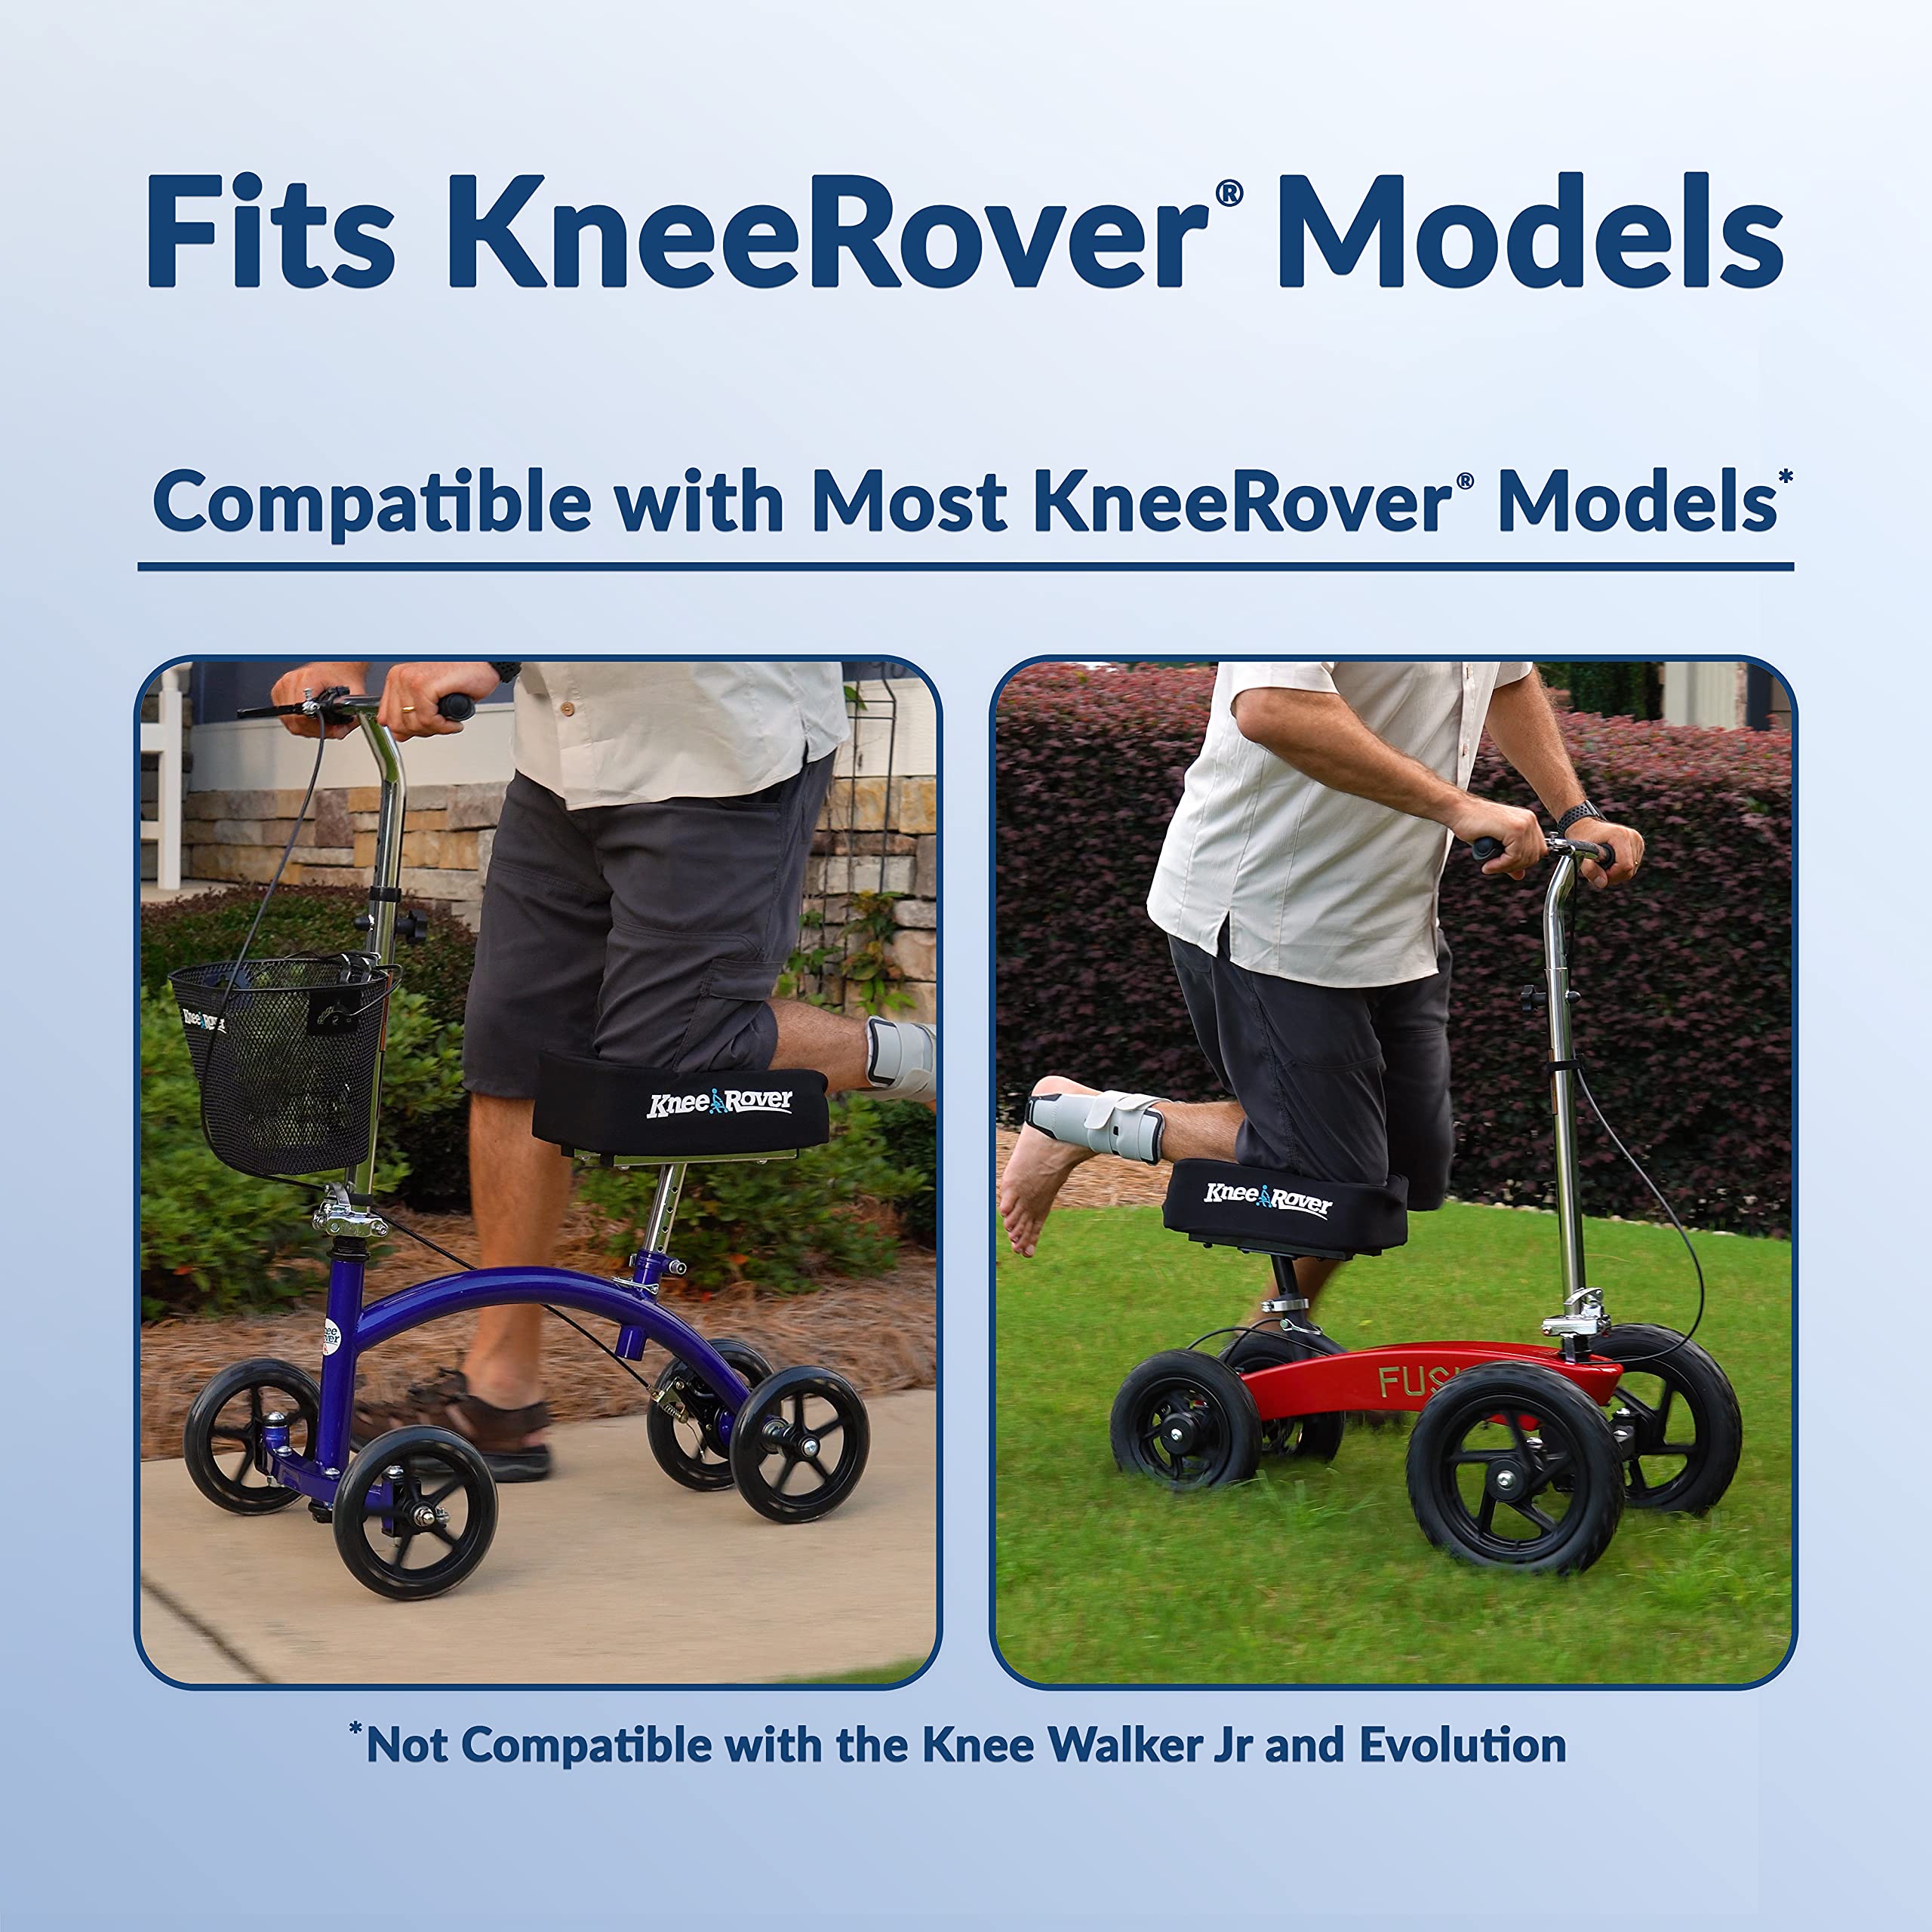 KneeRover Memory Pad - Knee Scooter Knee Pad Cover Featuring Comfortable Memory Foam, 13” x 7” x 4”